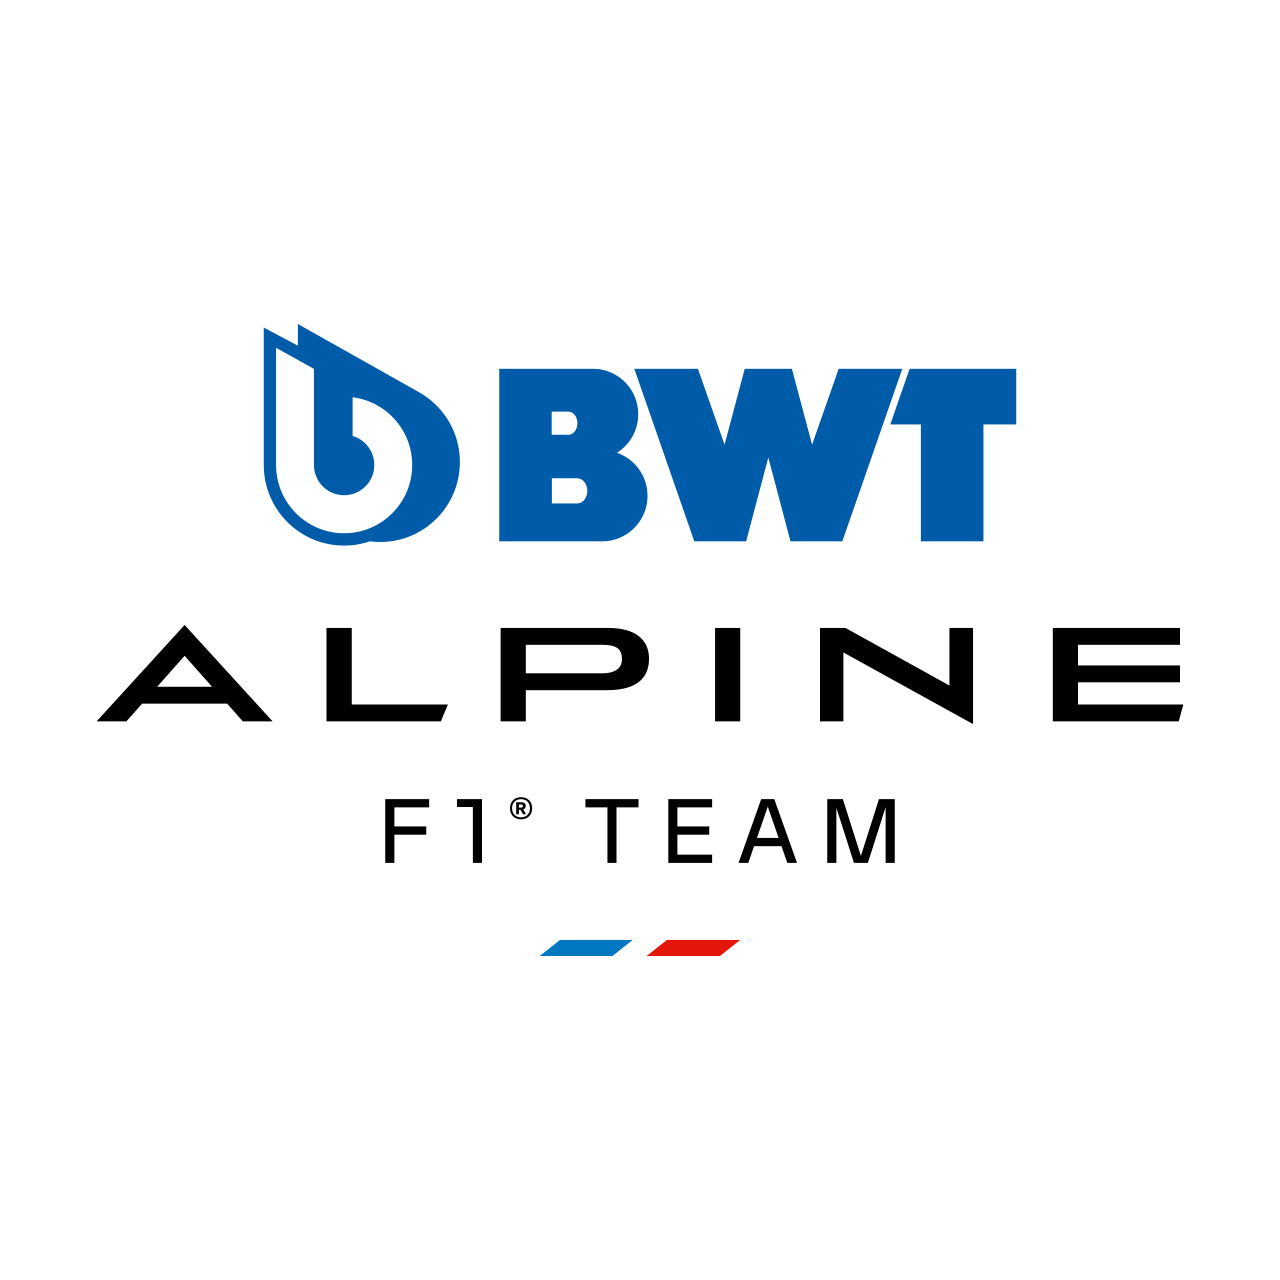 Alpine Formula 1 team in the pink as BWT strategic partnership is confirmed  : PlanetF1